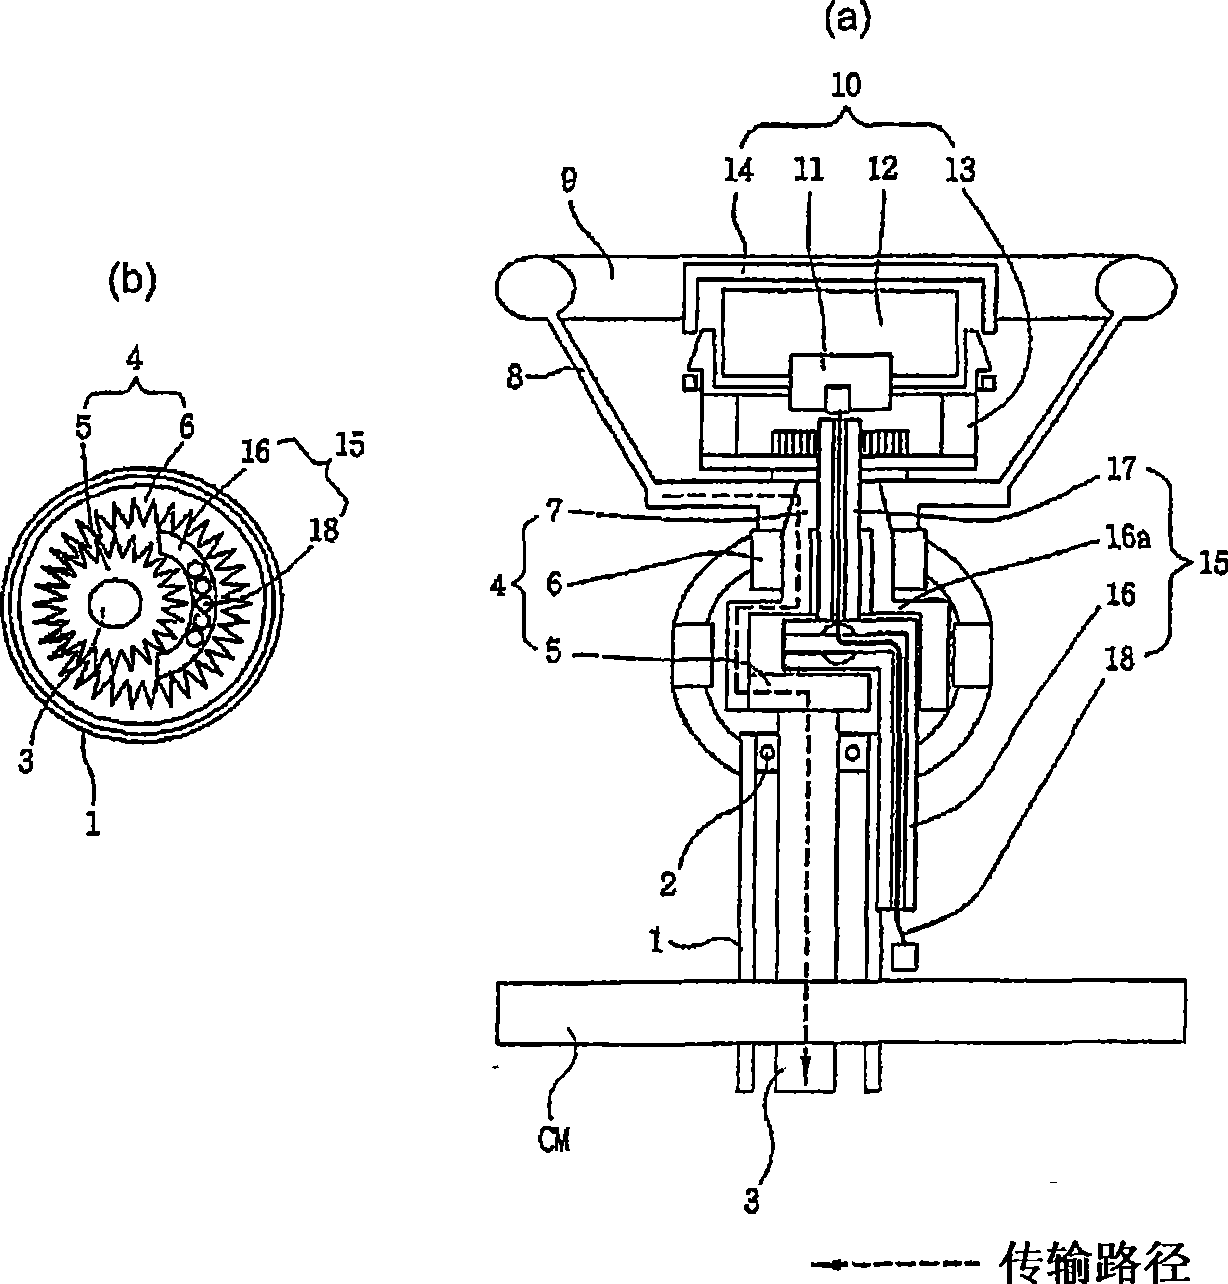 Vehicle steering system including irrotational airbag module